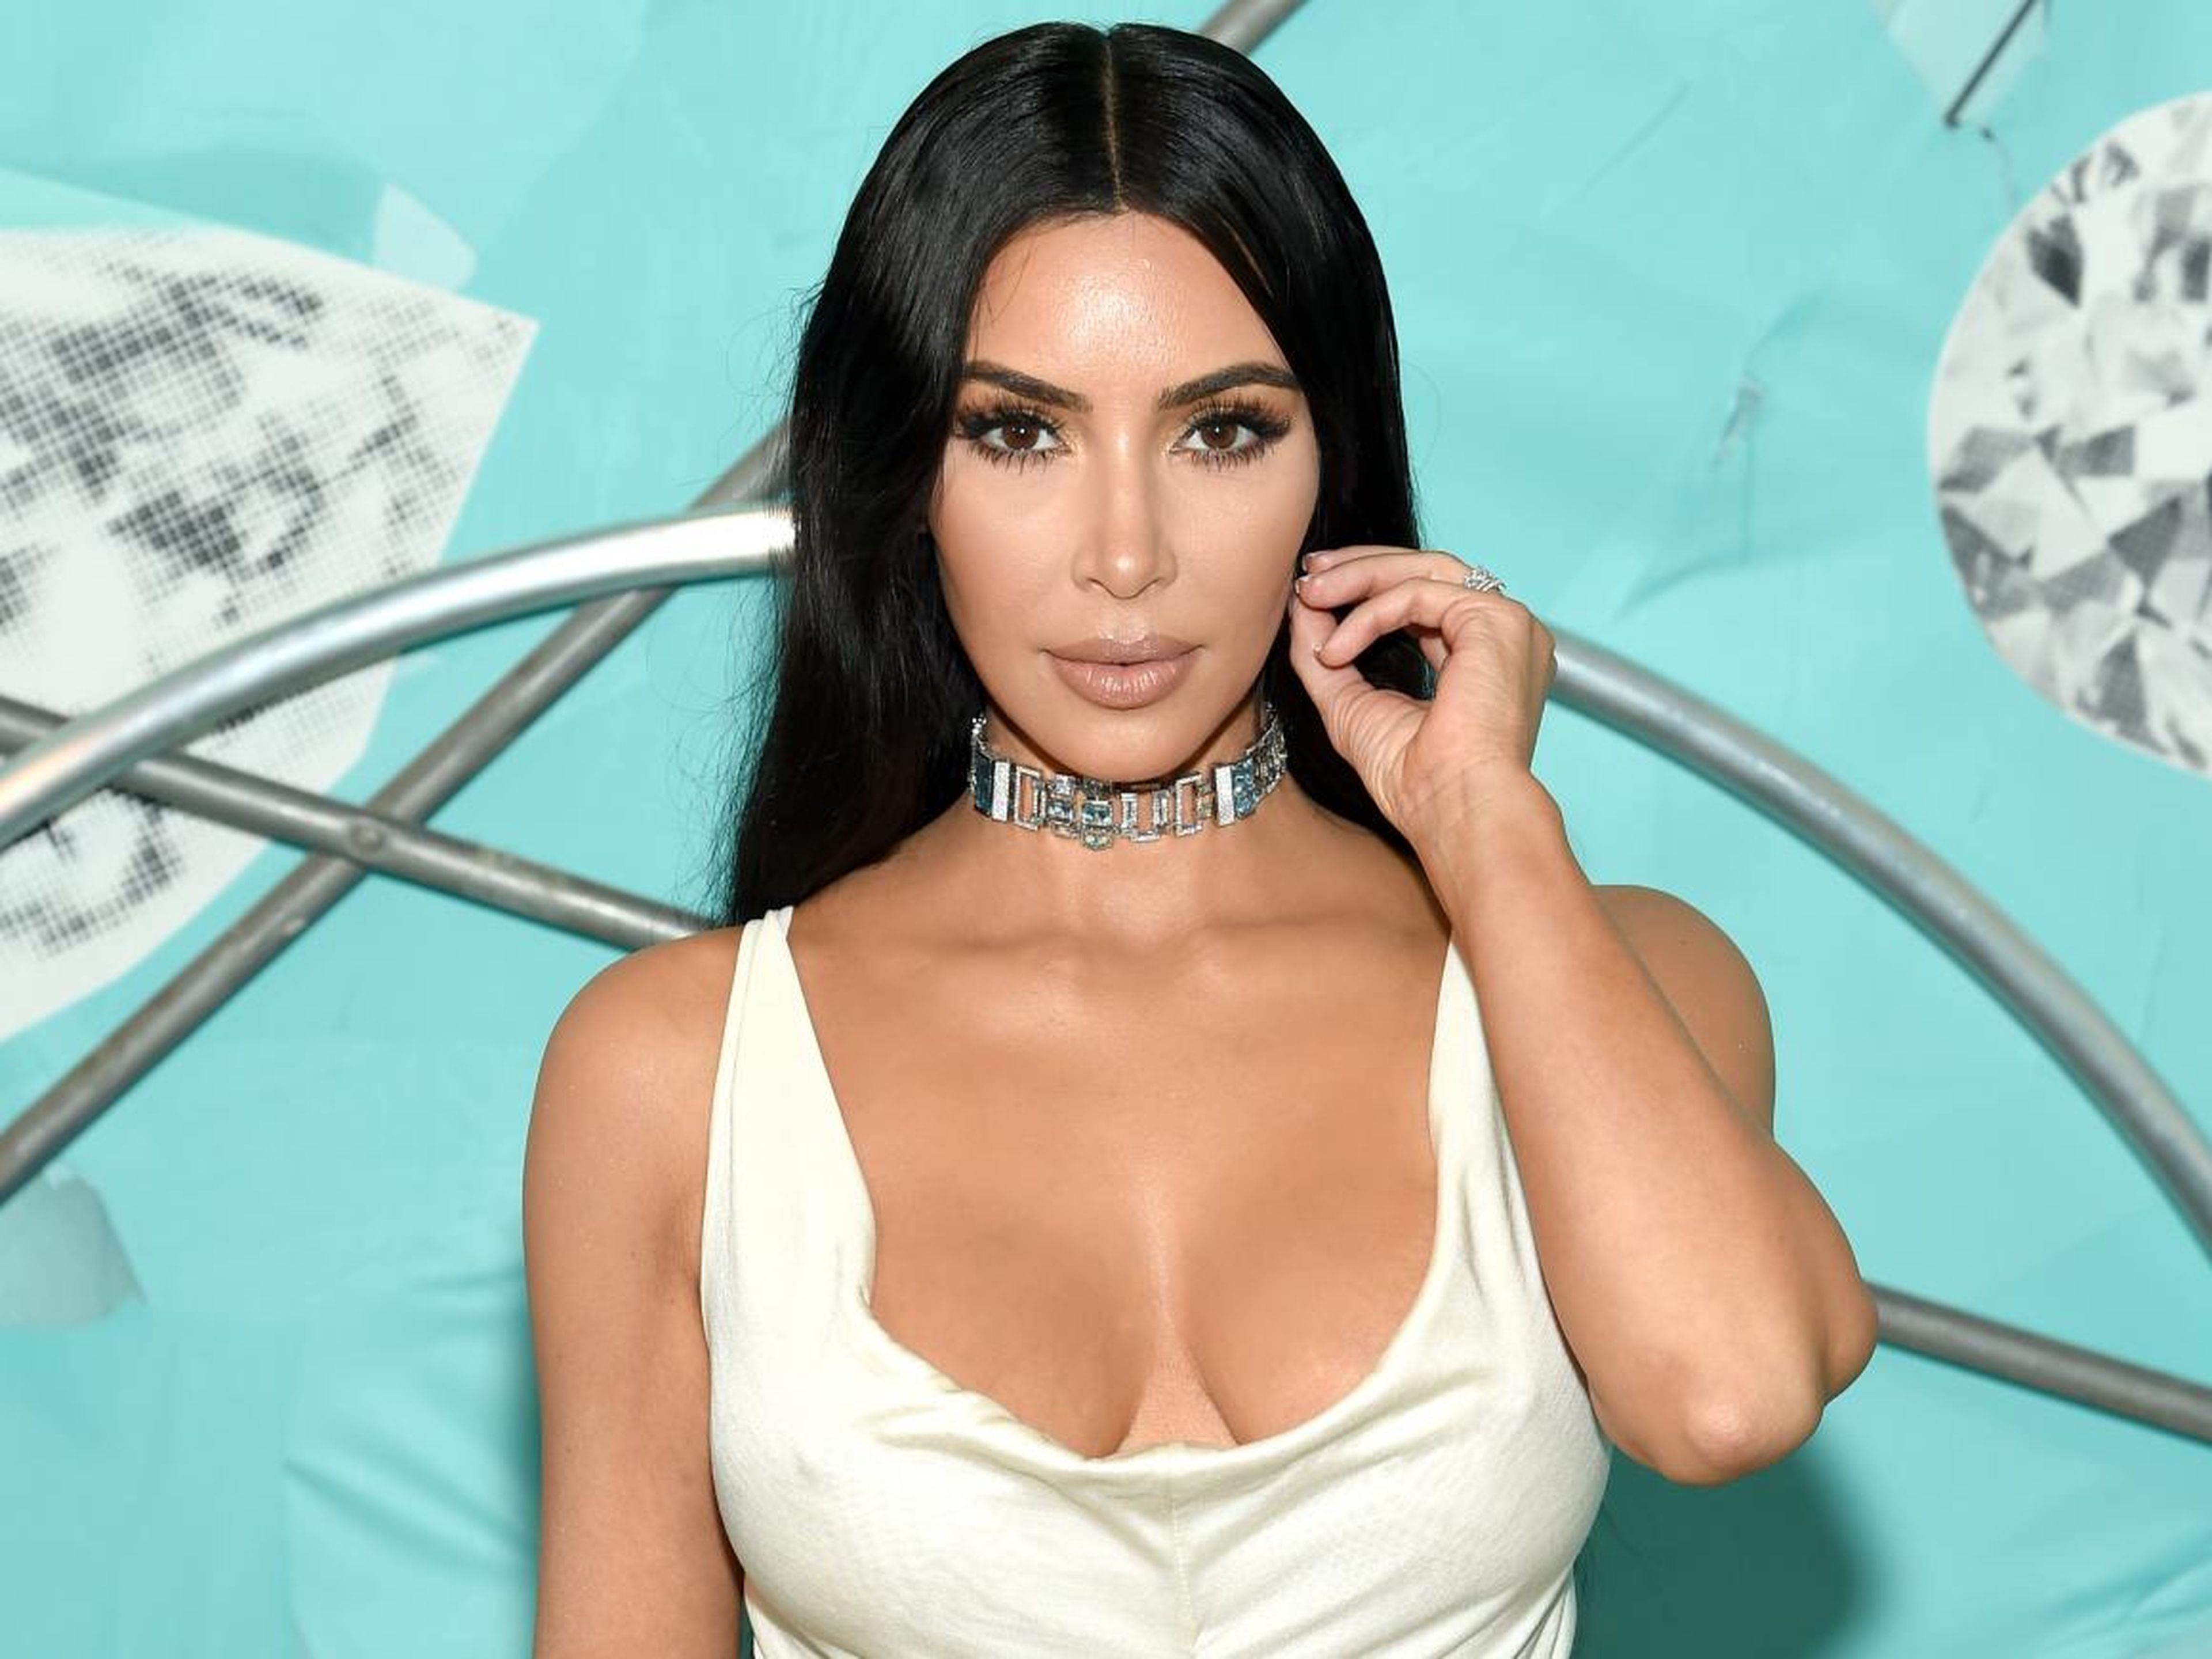 Most recently, Kim announced that she's studying up for the 2022 bar exam. "It's never too late to follow your dreams," she wrote on Instagram.